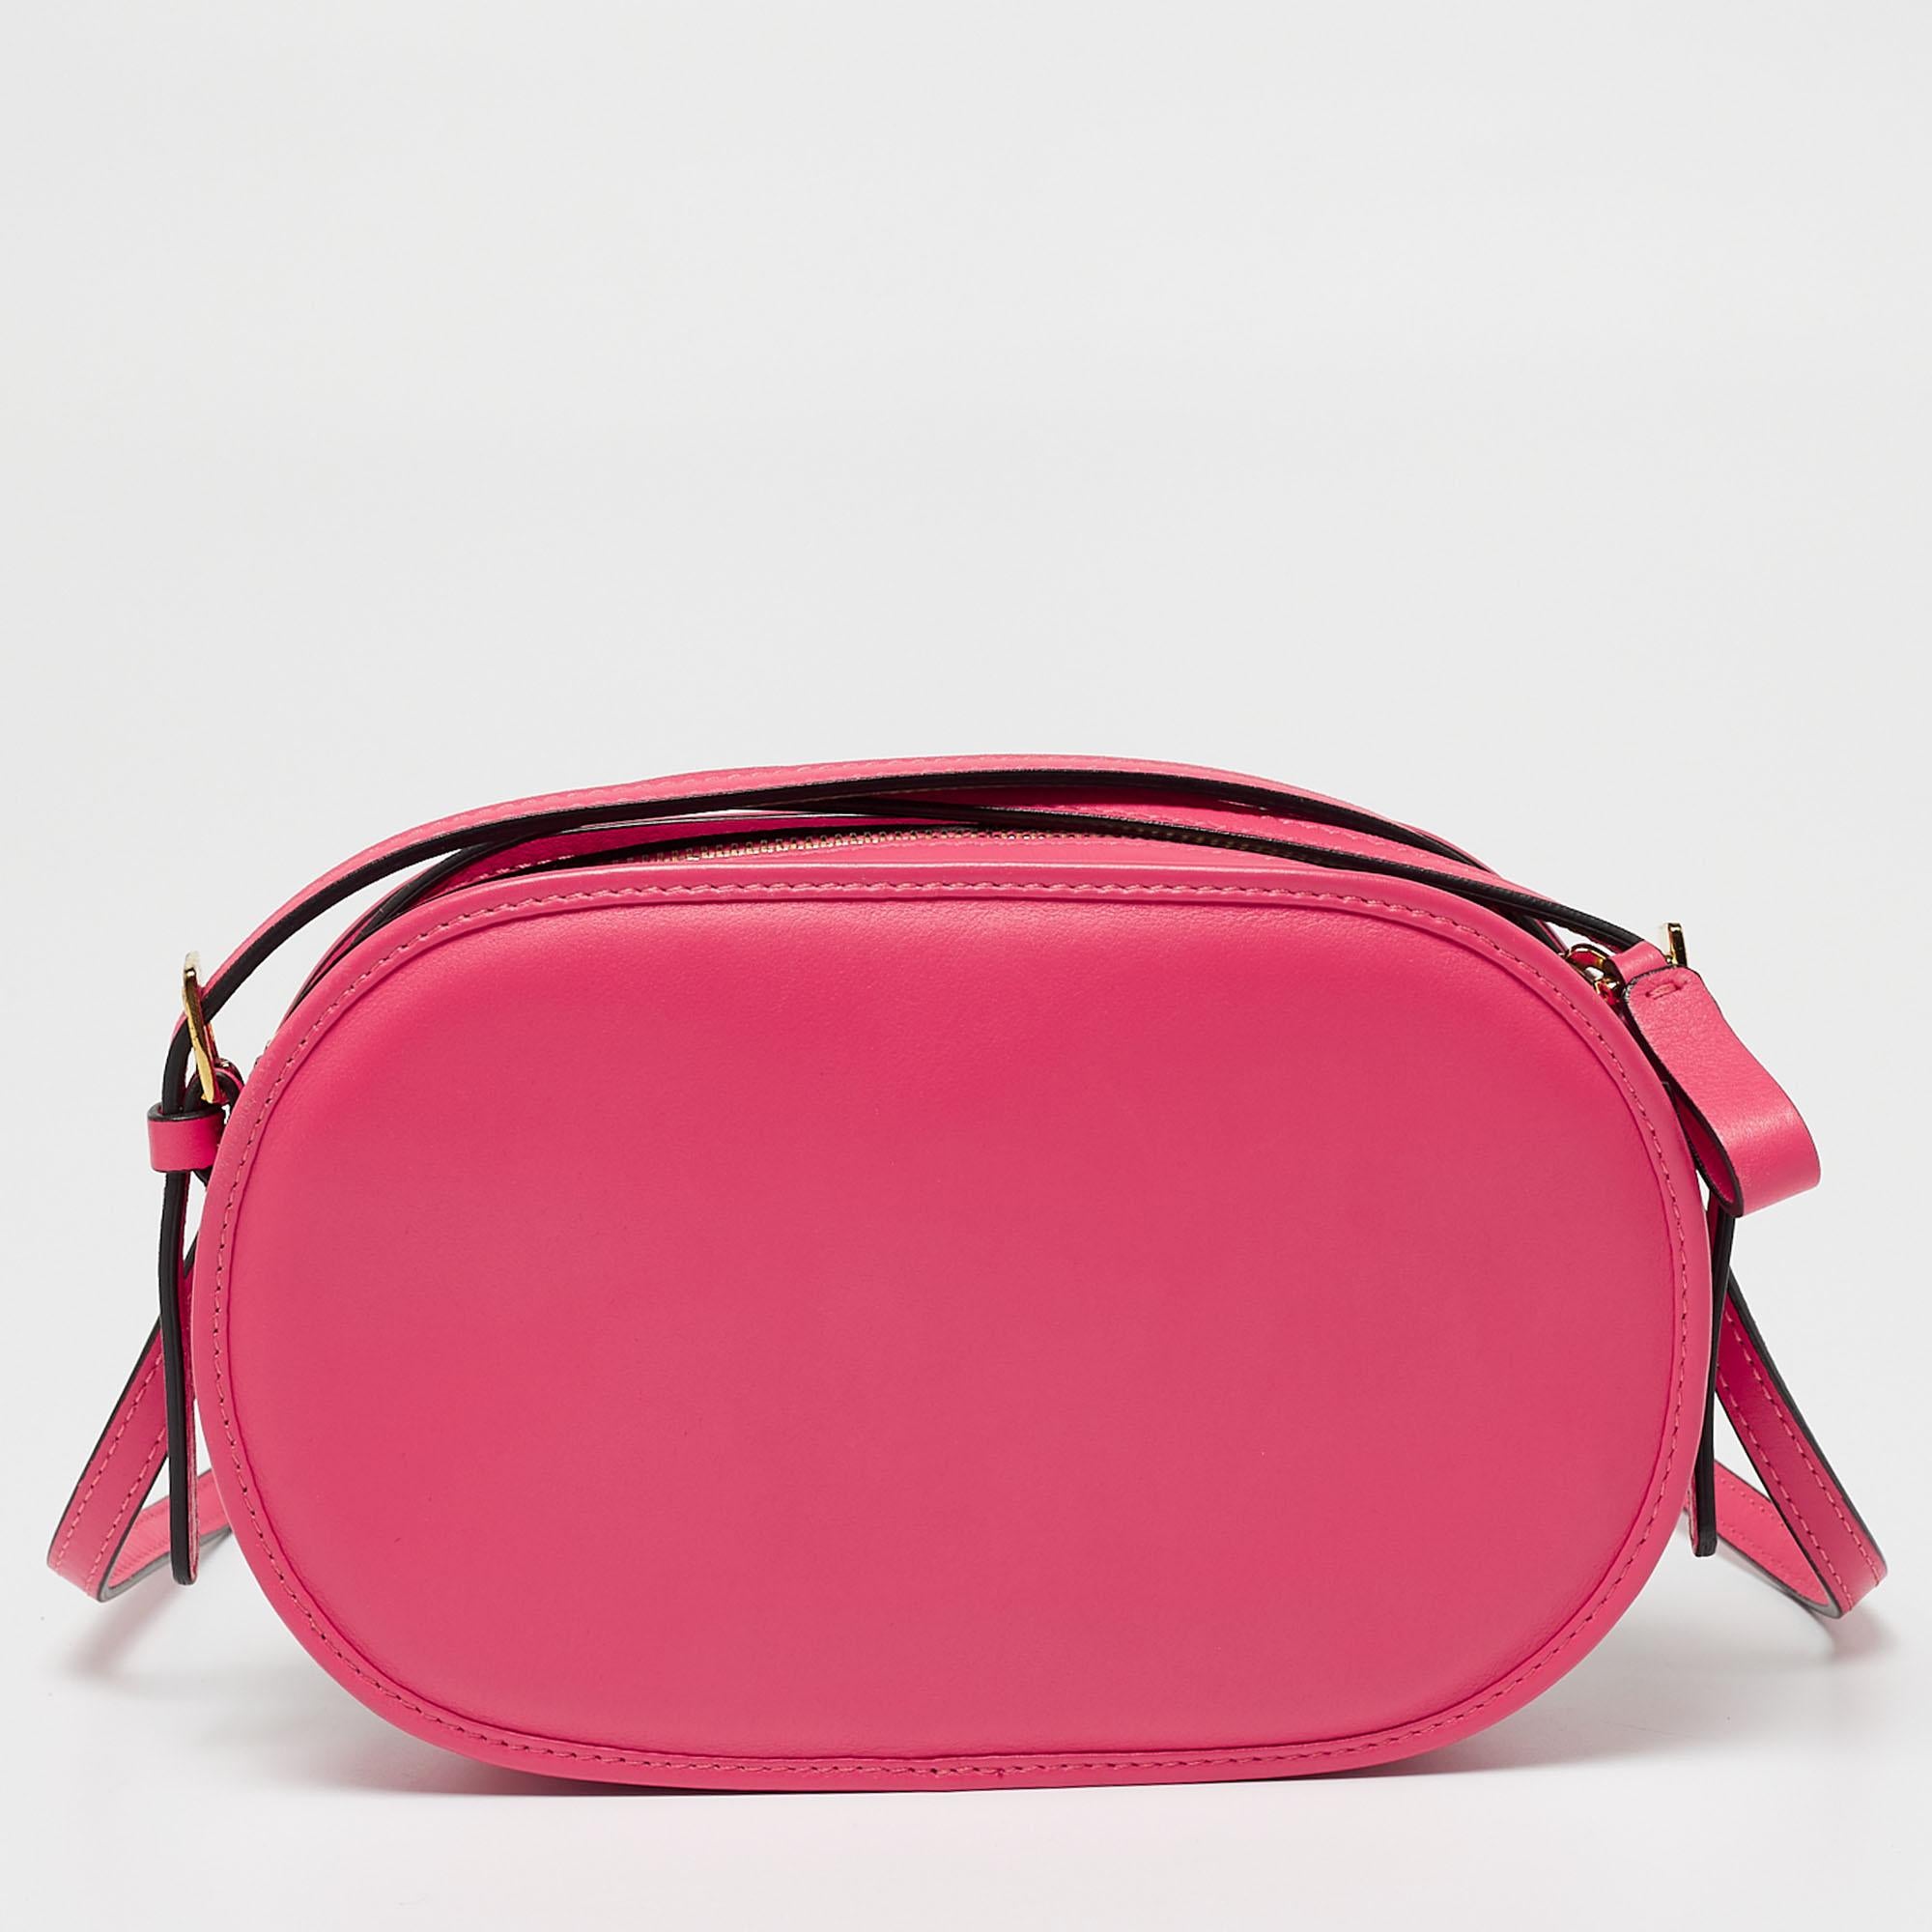 The structured silhouette of this Valentino bag offers it a sophisticated appeal and makes it a versatile styling option. Designed to provide you with hand-free ease, it can be carried with a shoulder strap. The rose pink creation is rendered from